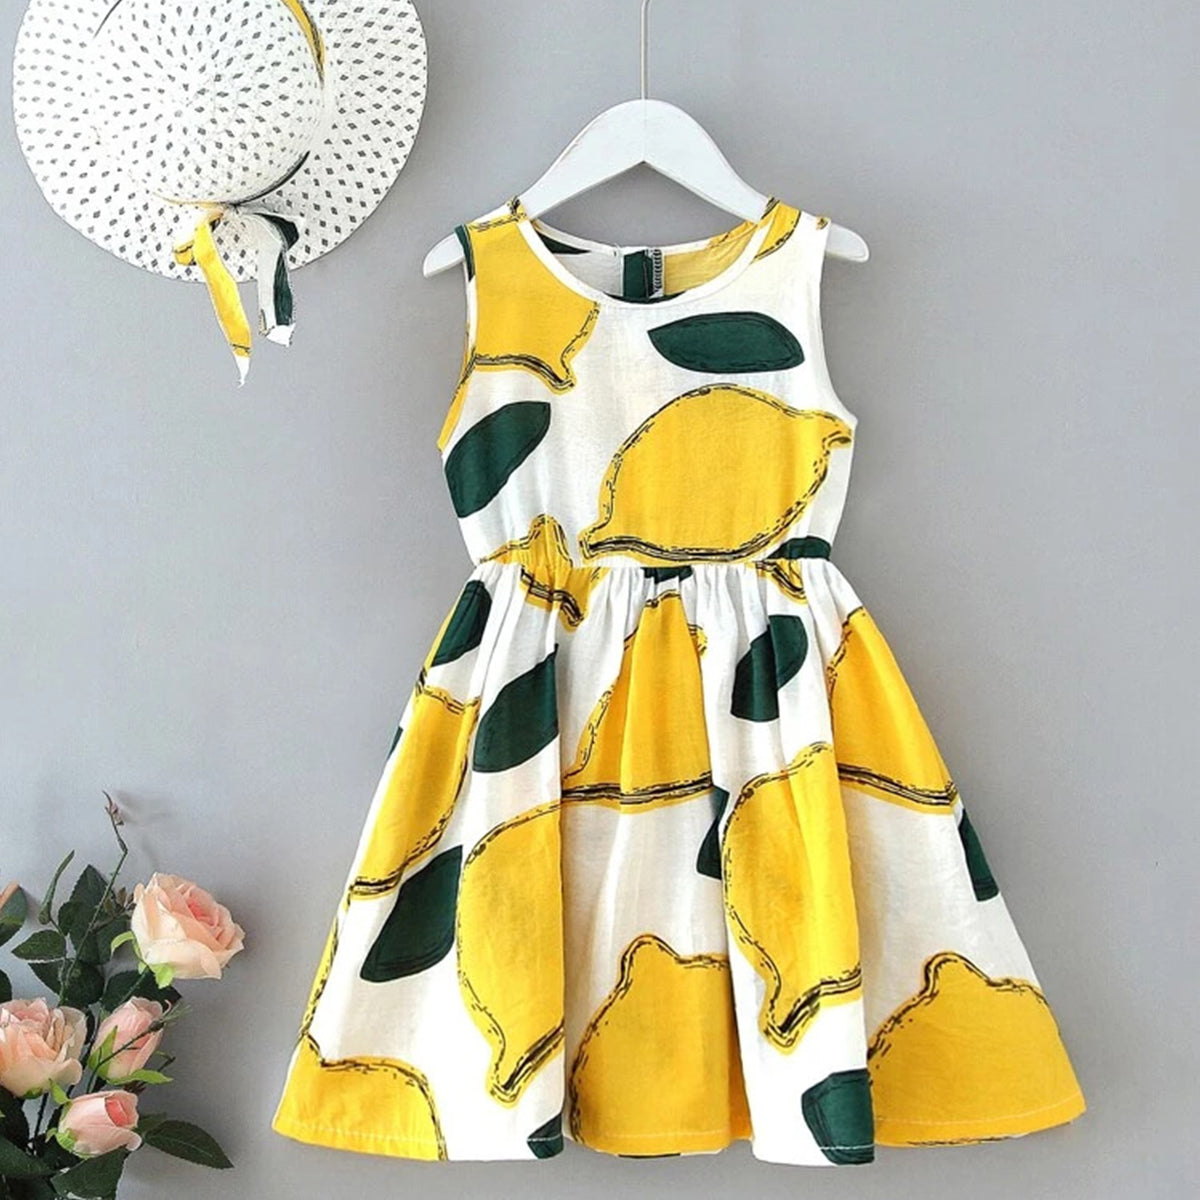 Kids New Fashion Yellow_Green Frock & Dresses for Baby Girls.